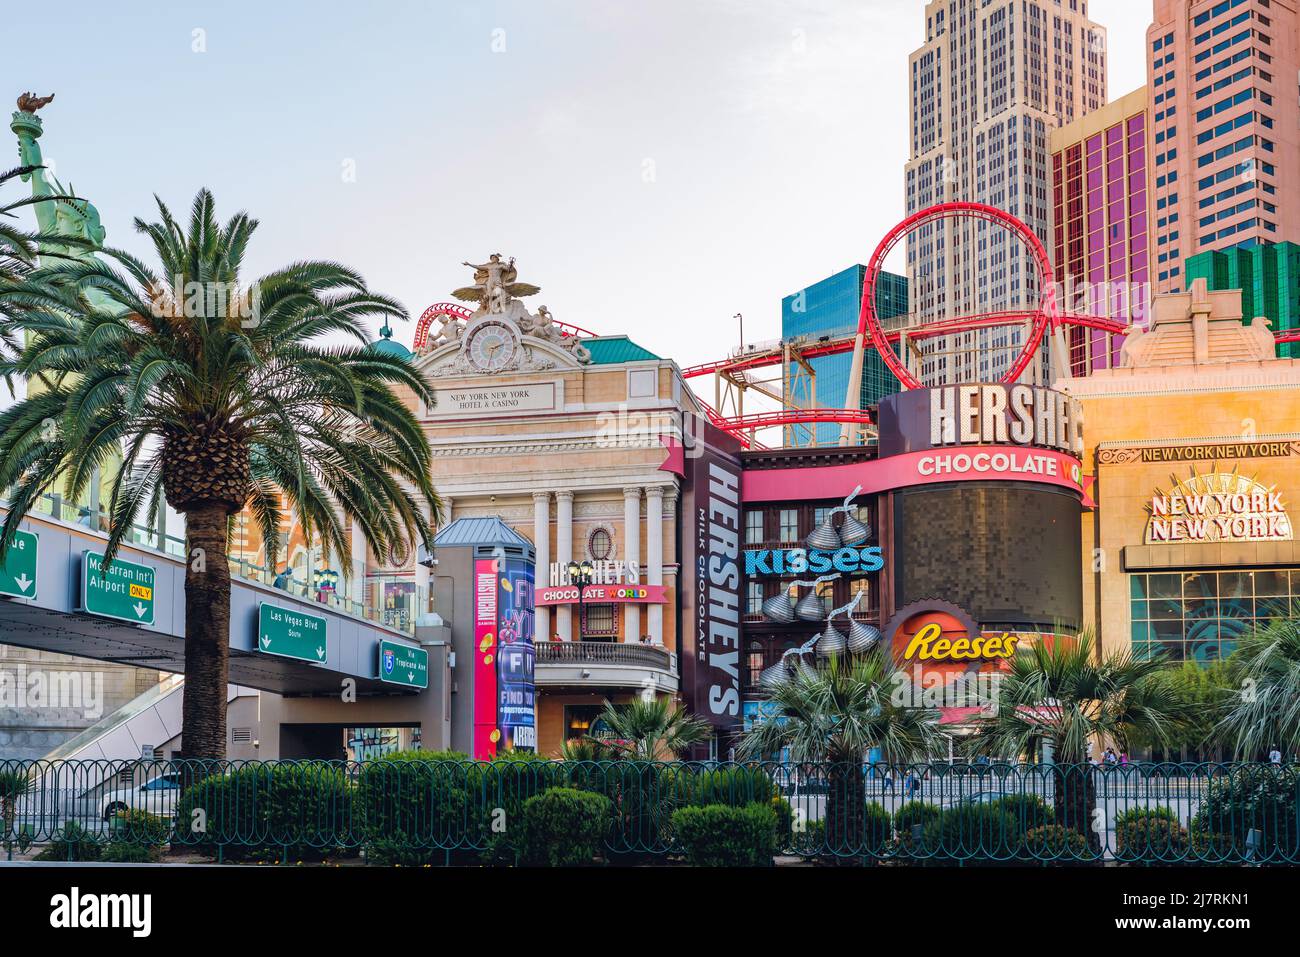 Las Vegas, Nevada, USA - May 4, 2022.  New York-New York Hotel and Casino in the center of Las Vegas Strip. Architecture, people, street view Stock Photo